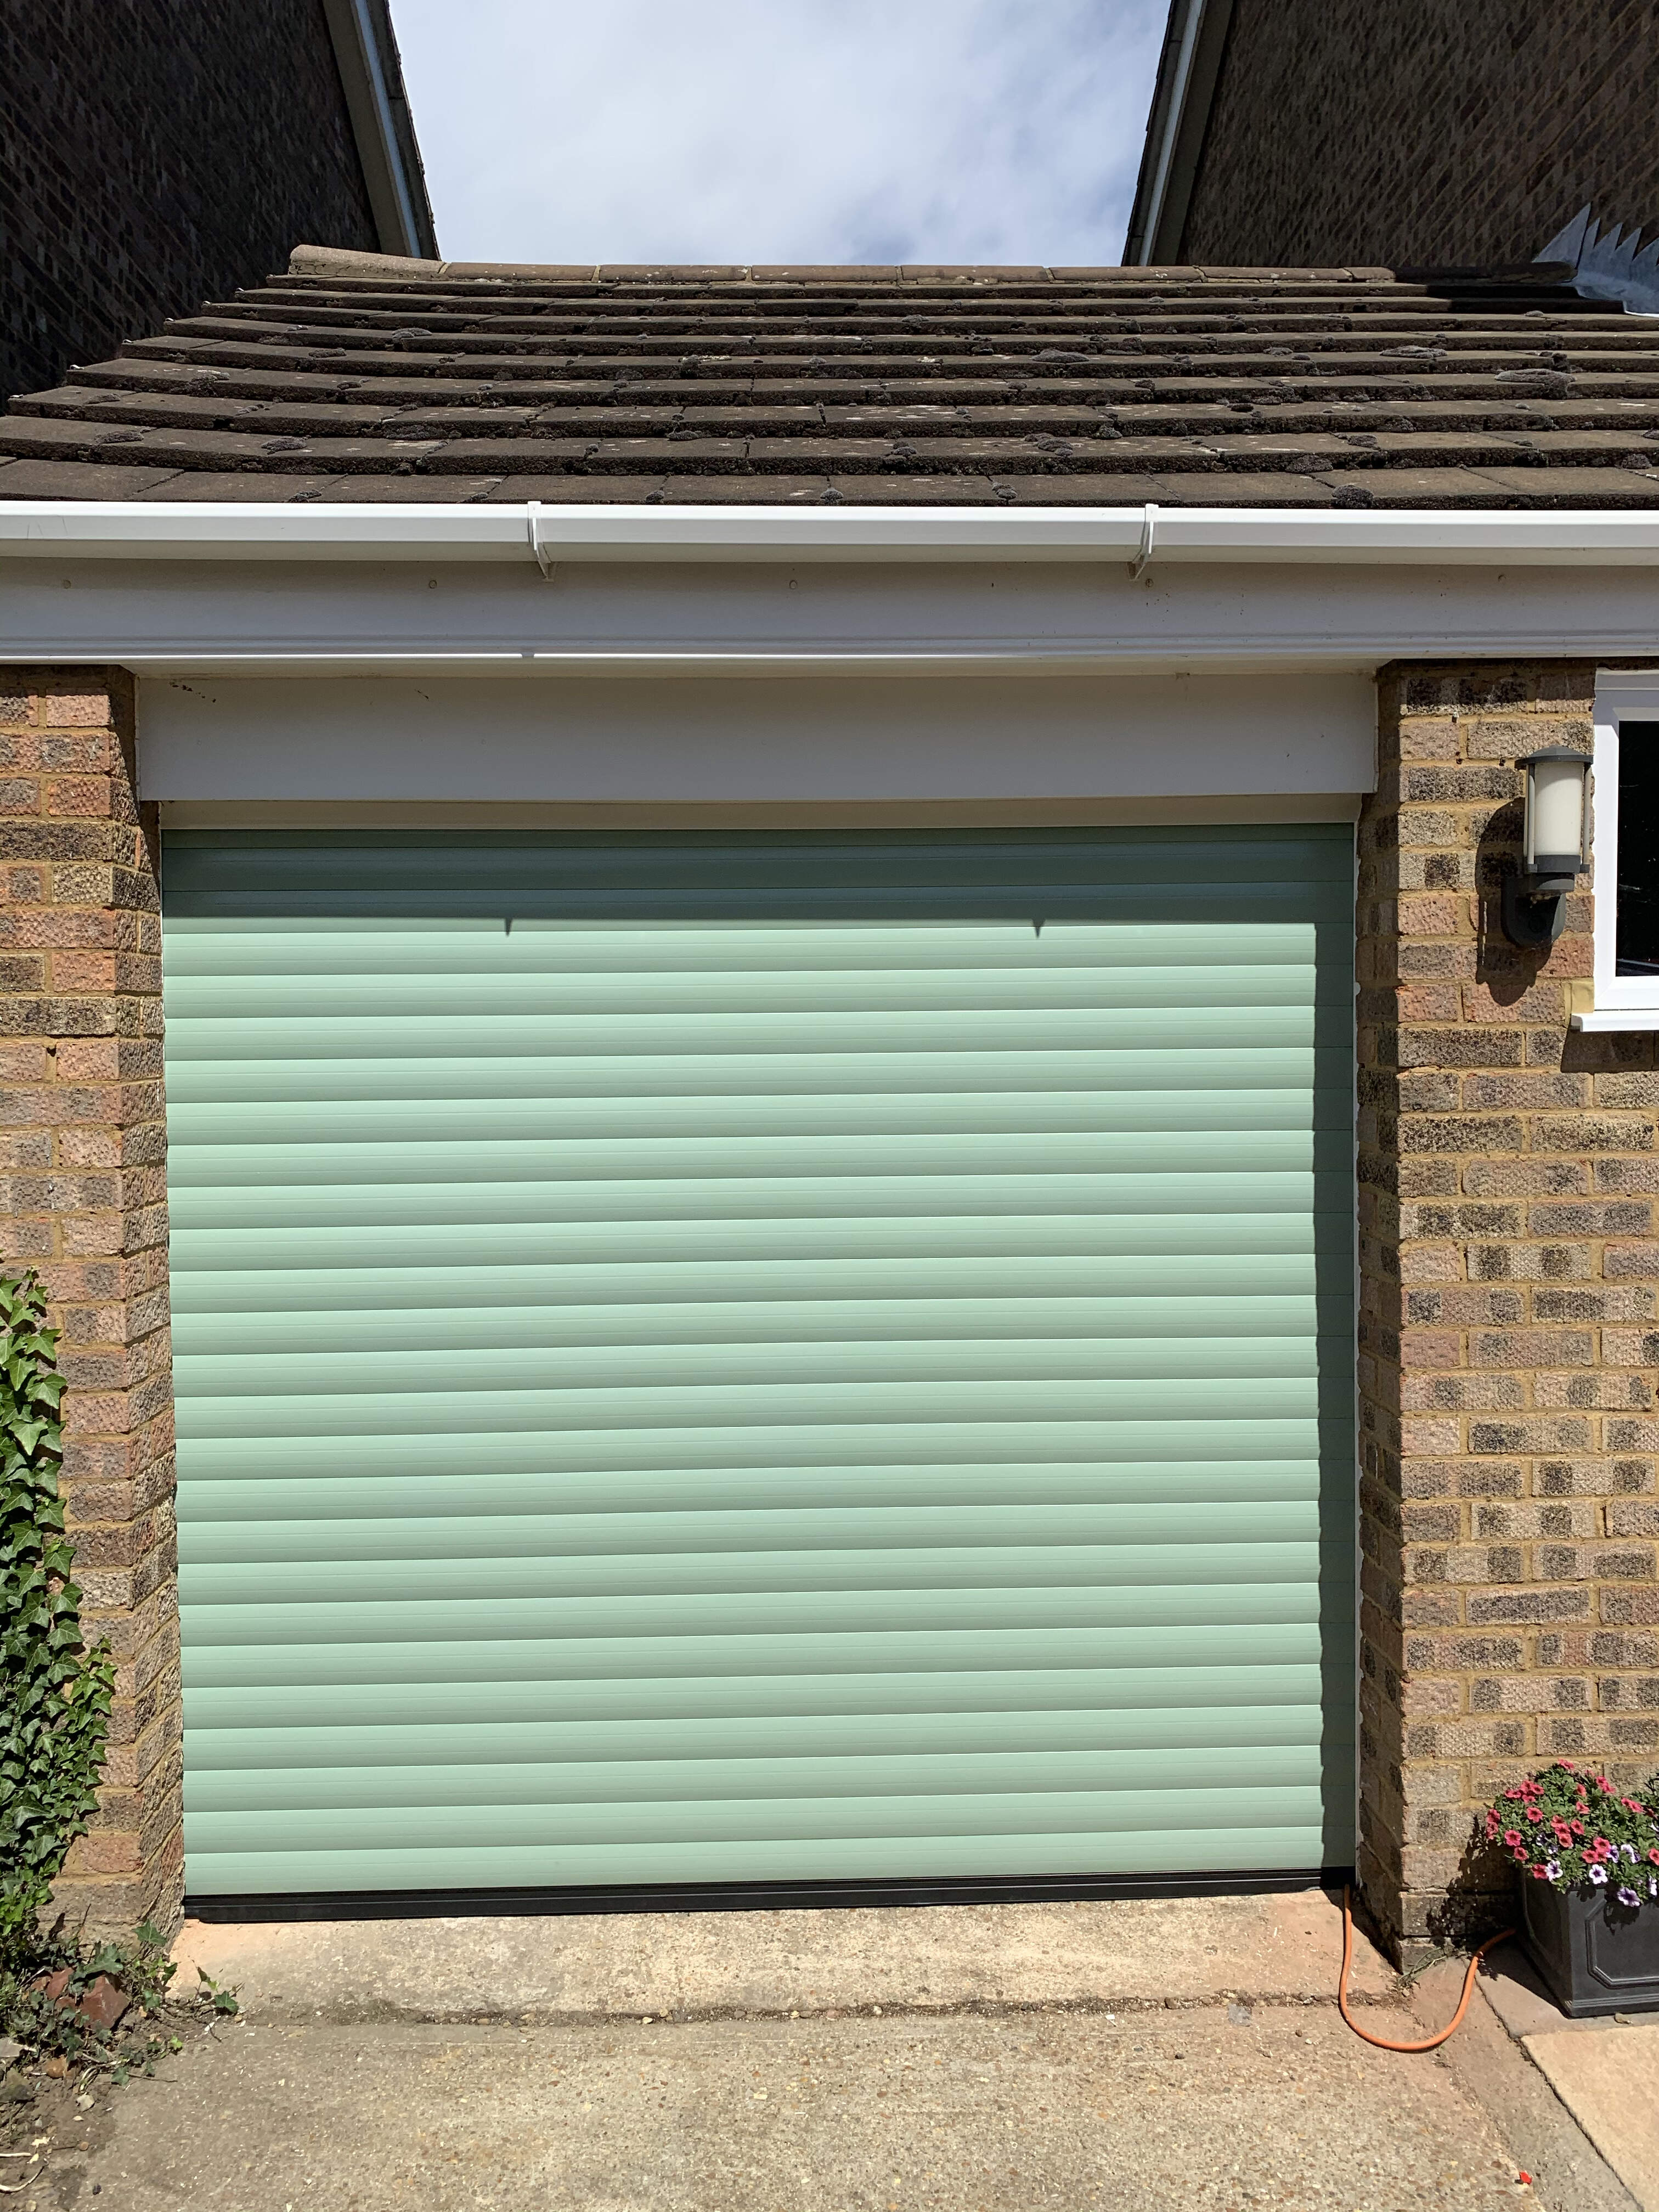 Single Insulated 77mm Lath (Chartwell Green) Roller Shutter Garage Door with White Frame.